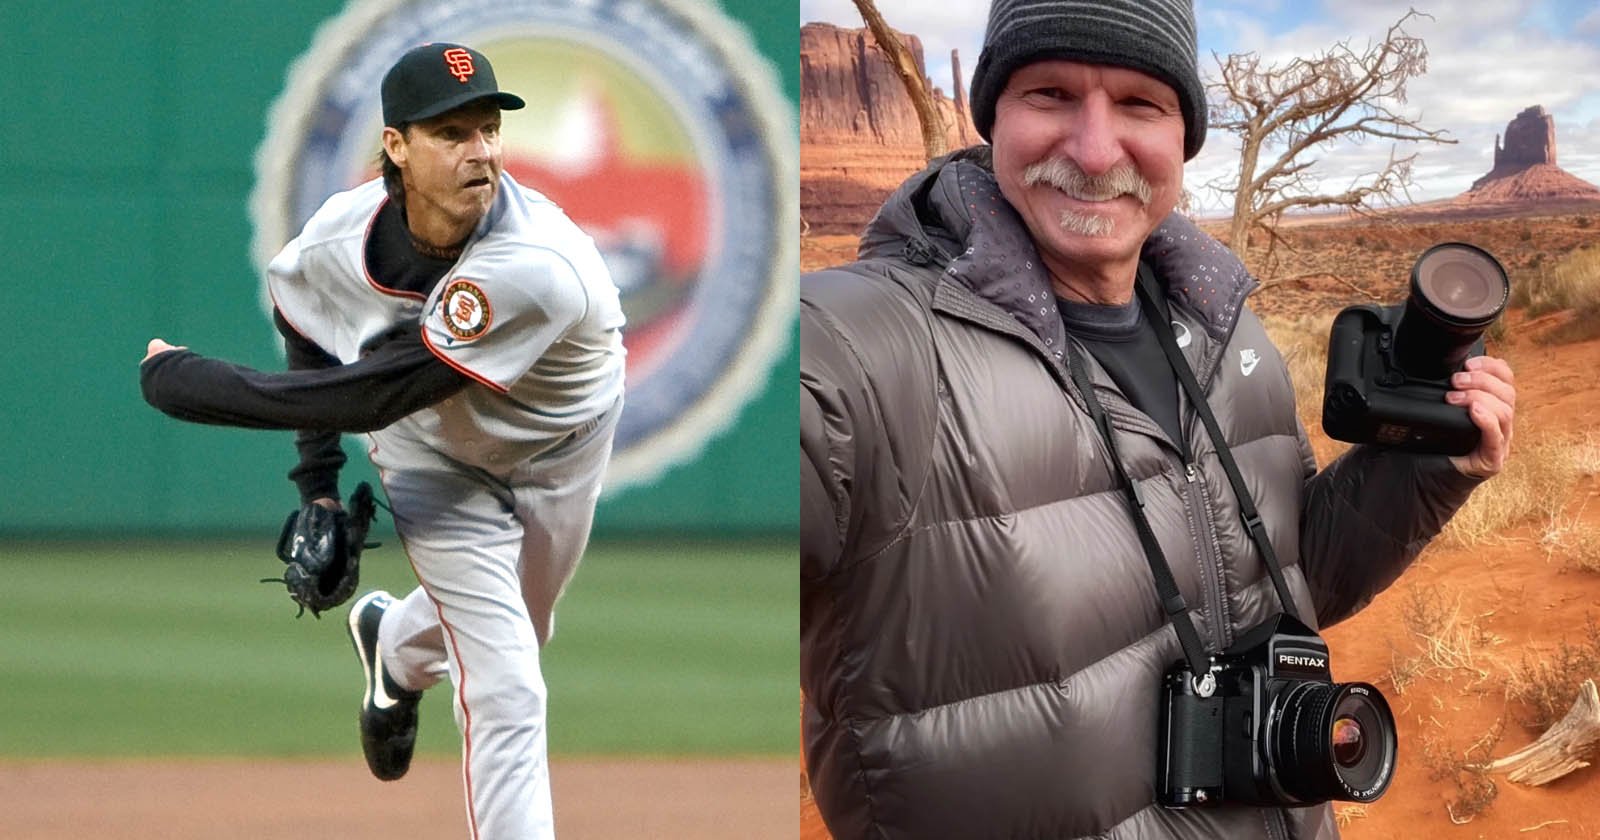 Randy Johnson: From Hall of Fame Pitcher to Pro Photographer